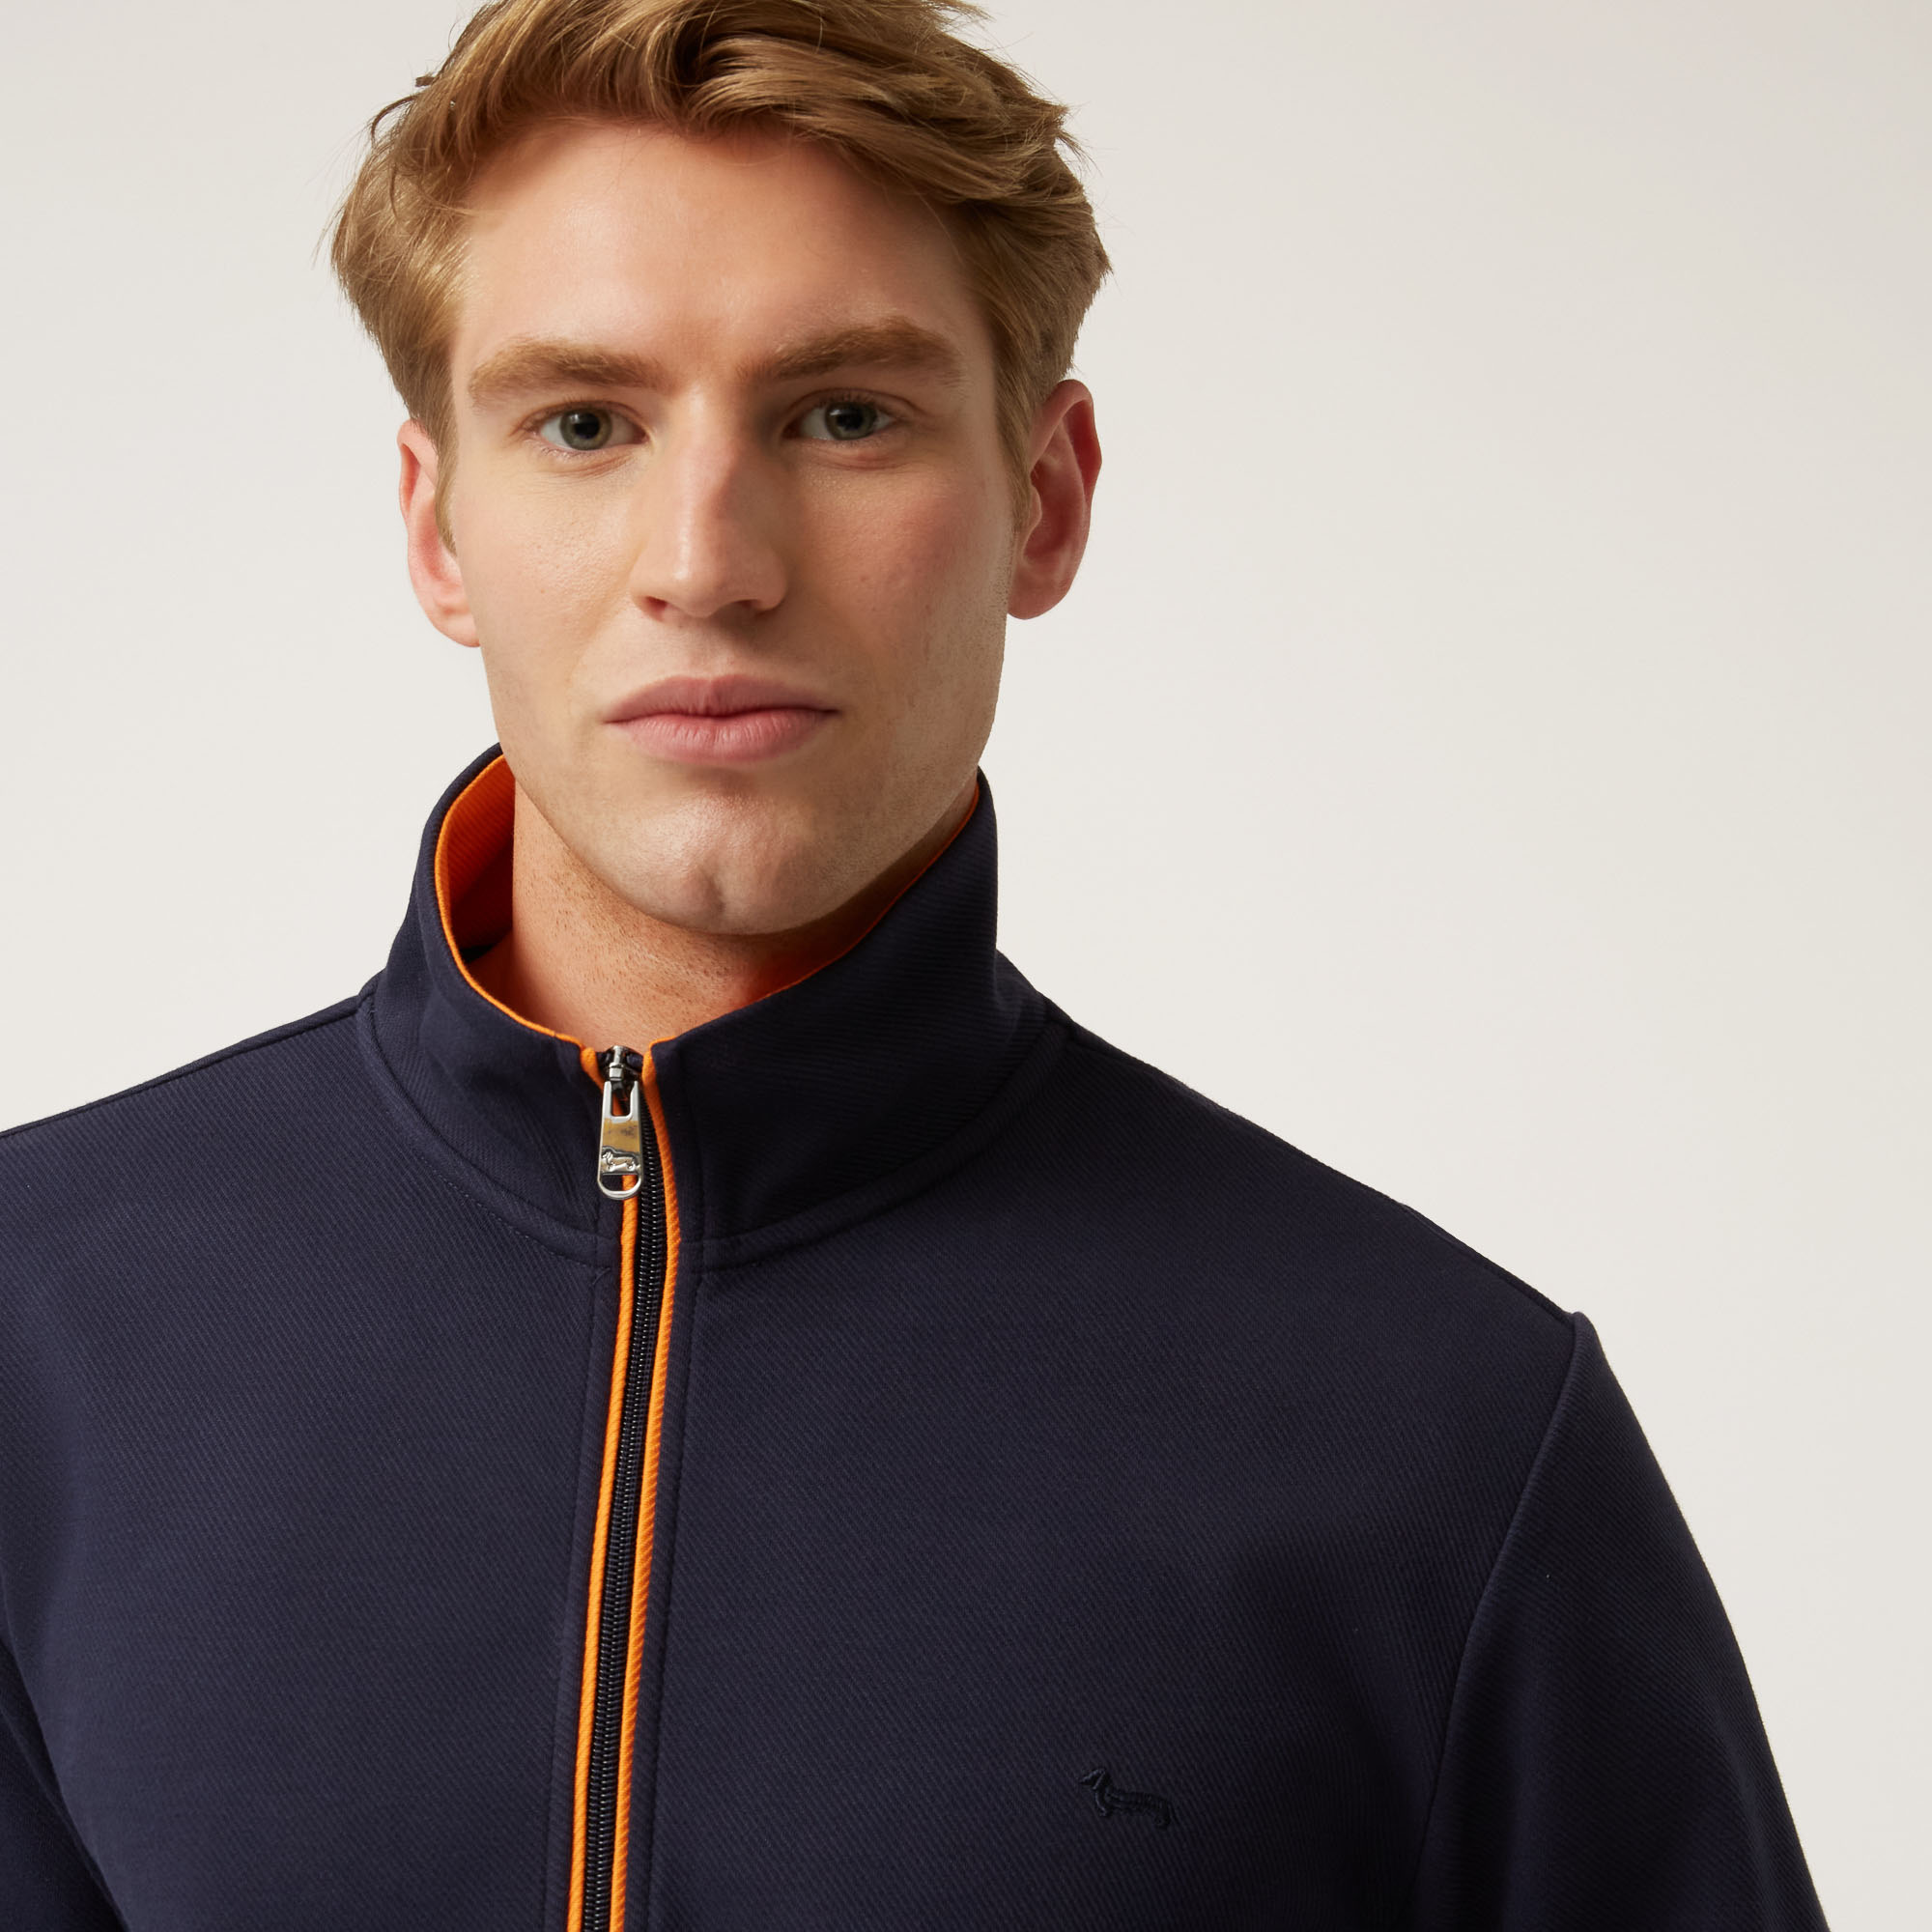 Felpa Full Zip Con Piping A Contrasto, Blu Navy, large image number 2